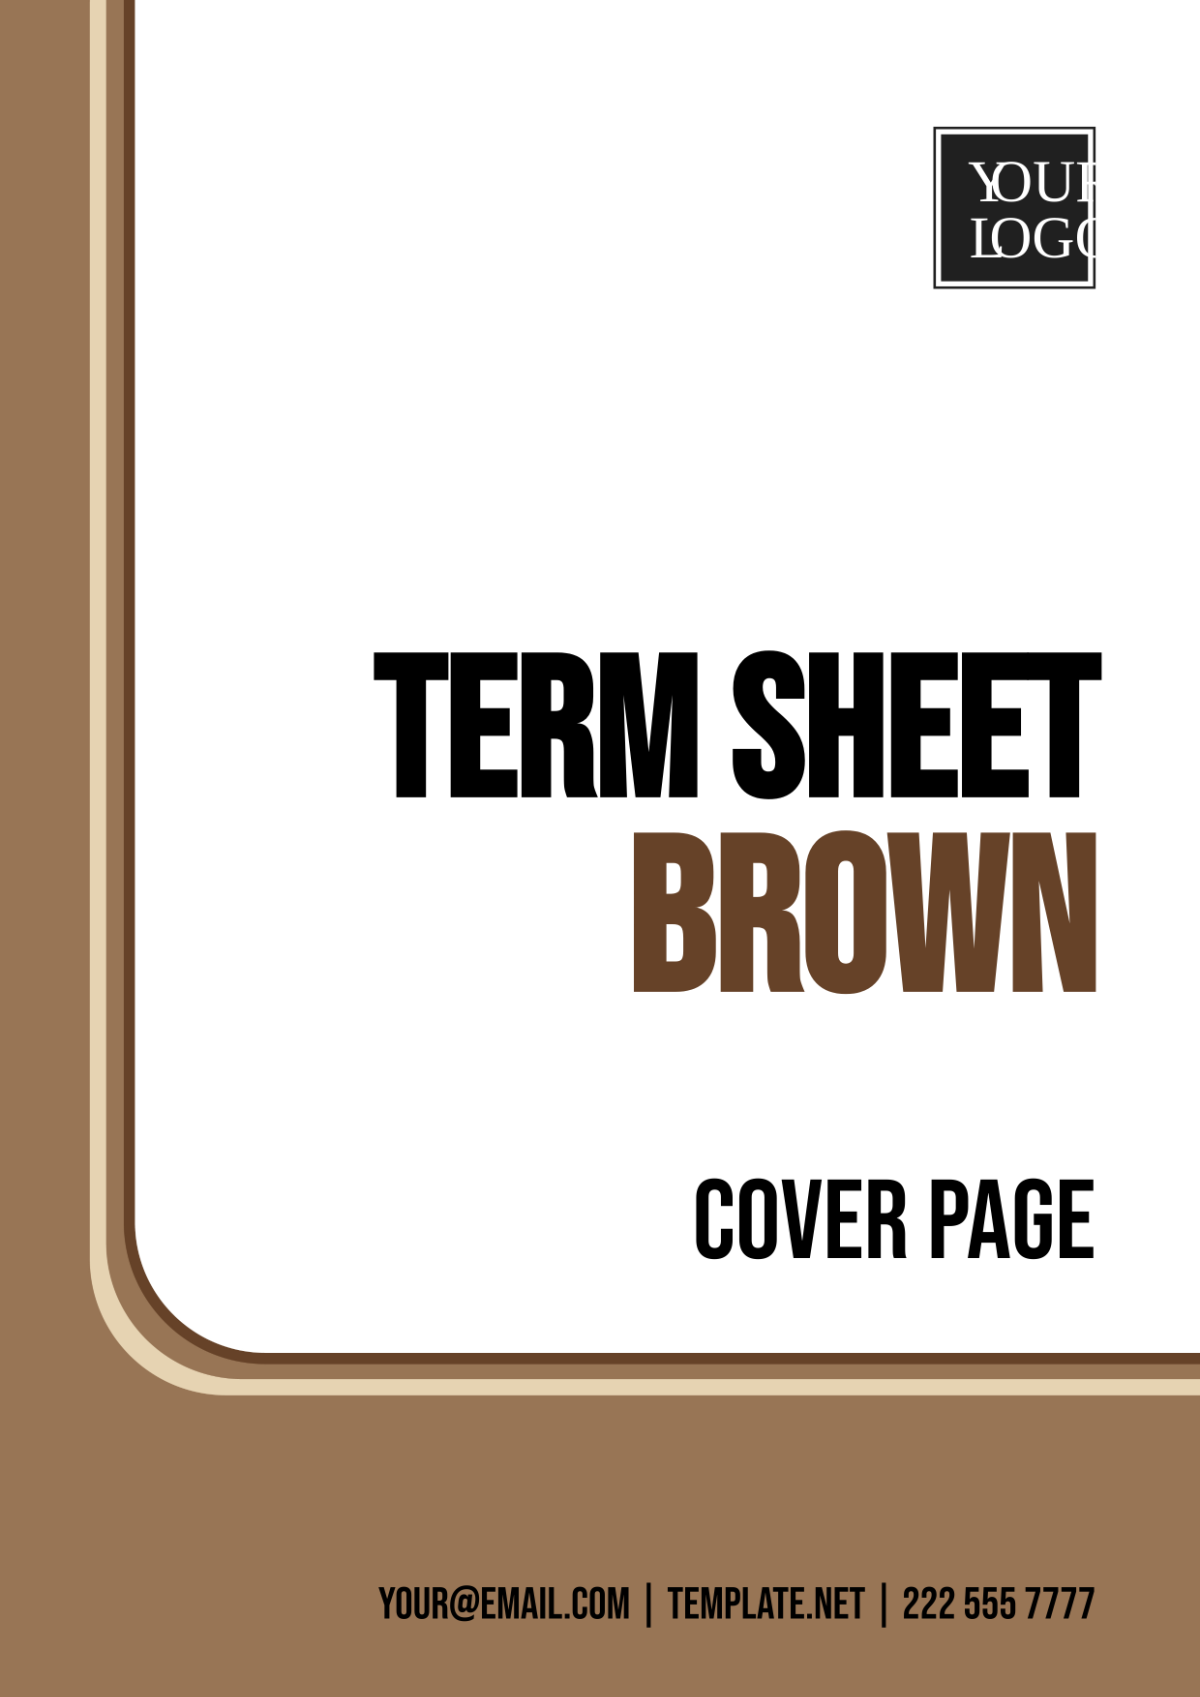 Term Sheet Brown Cover Page Template